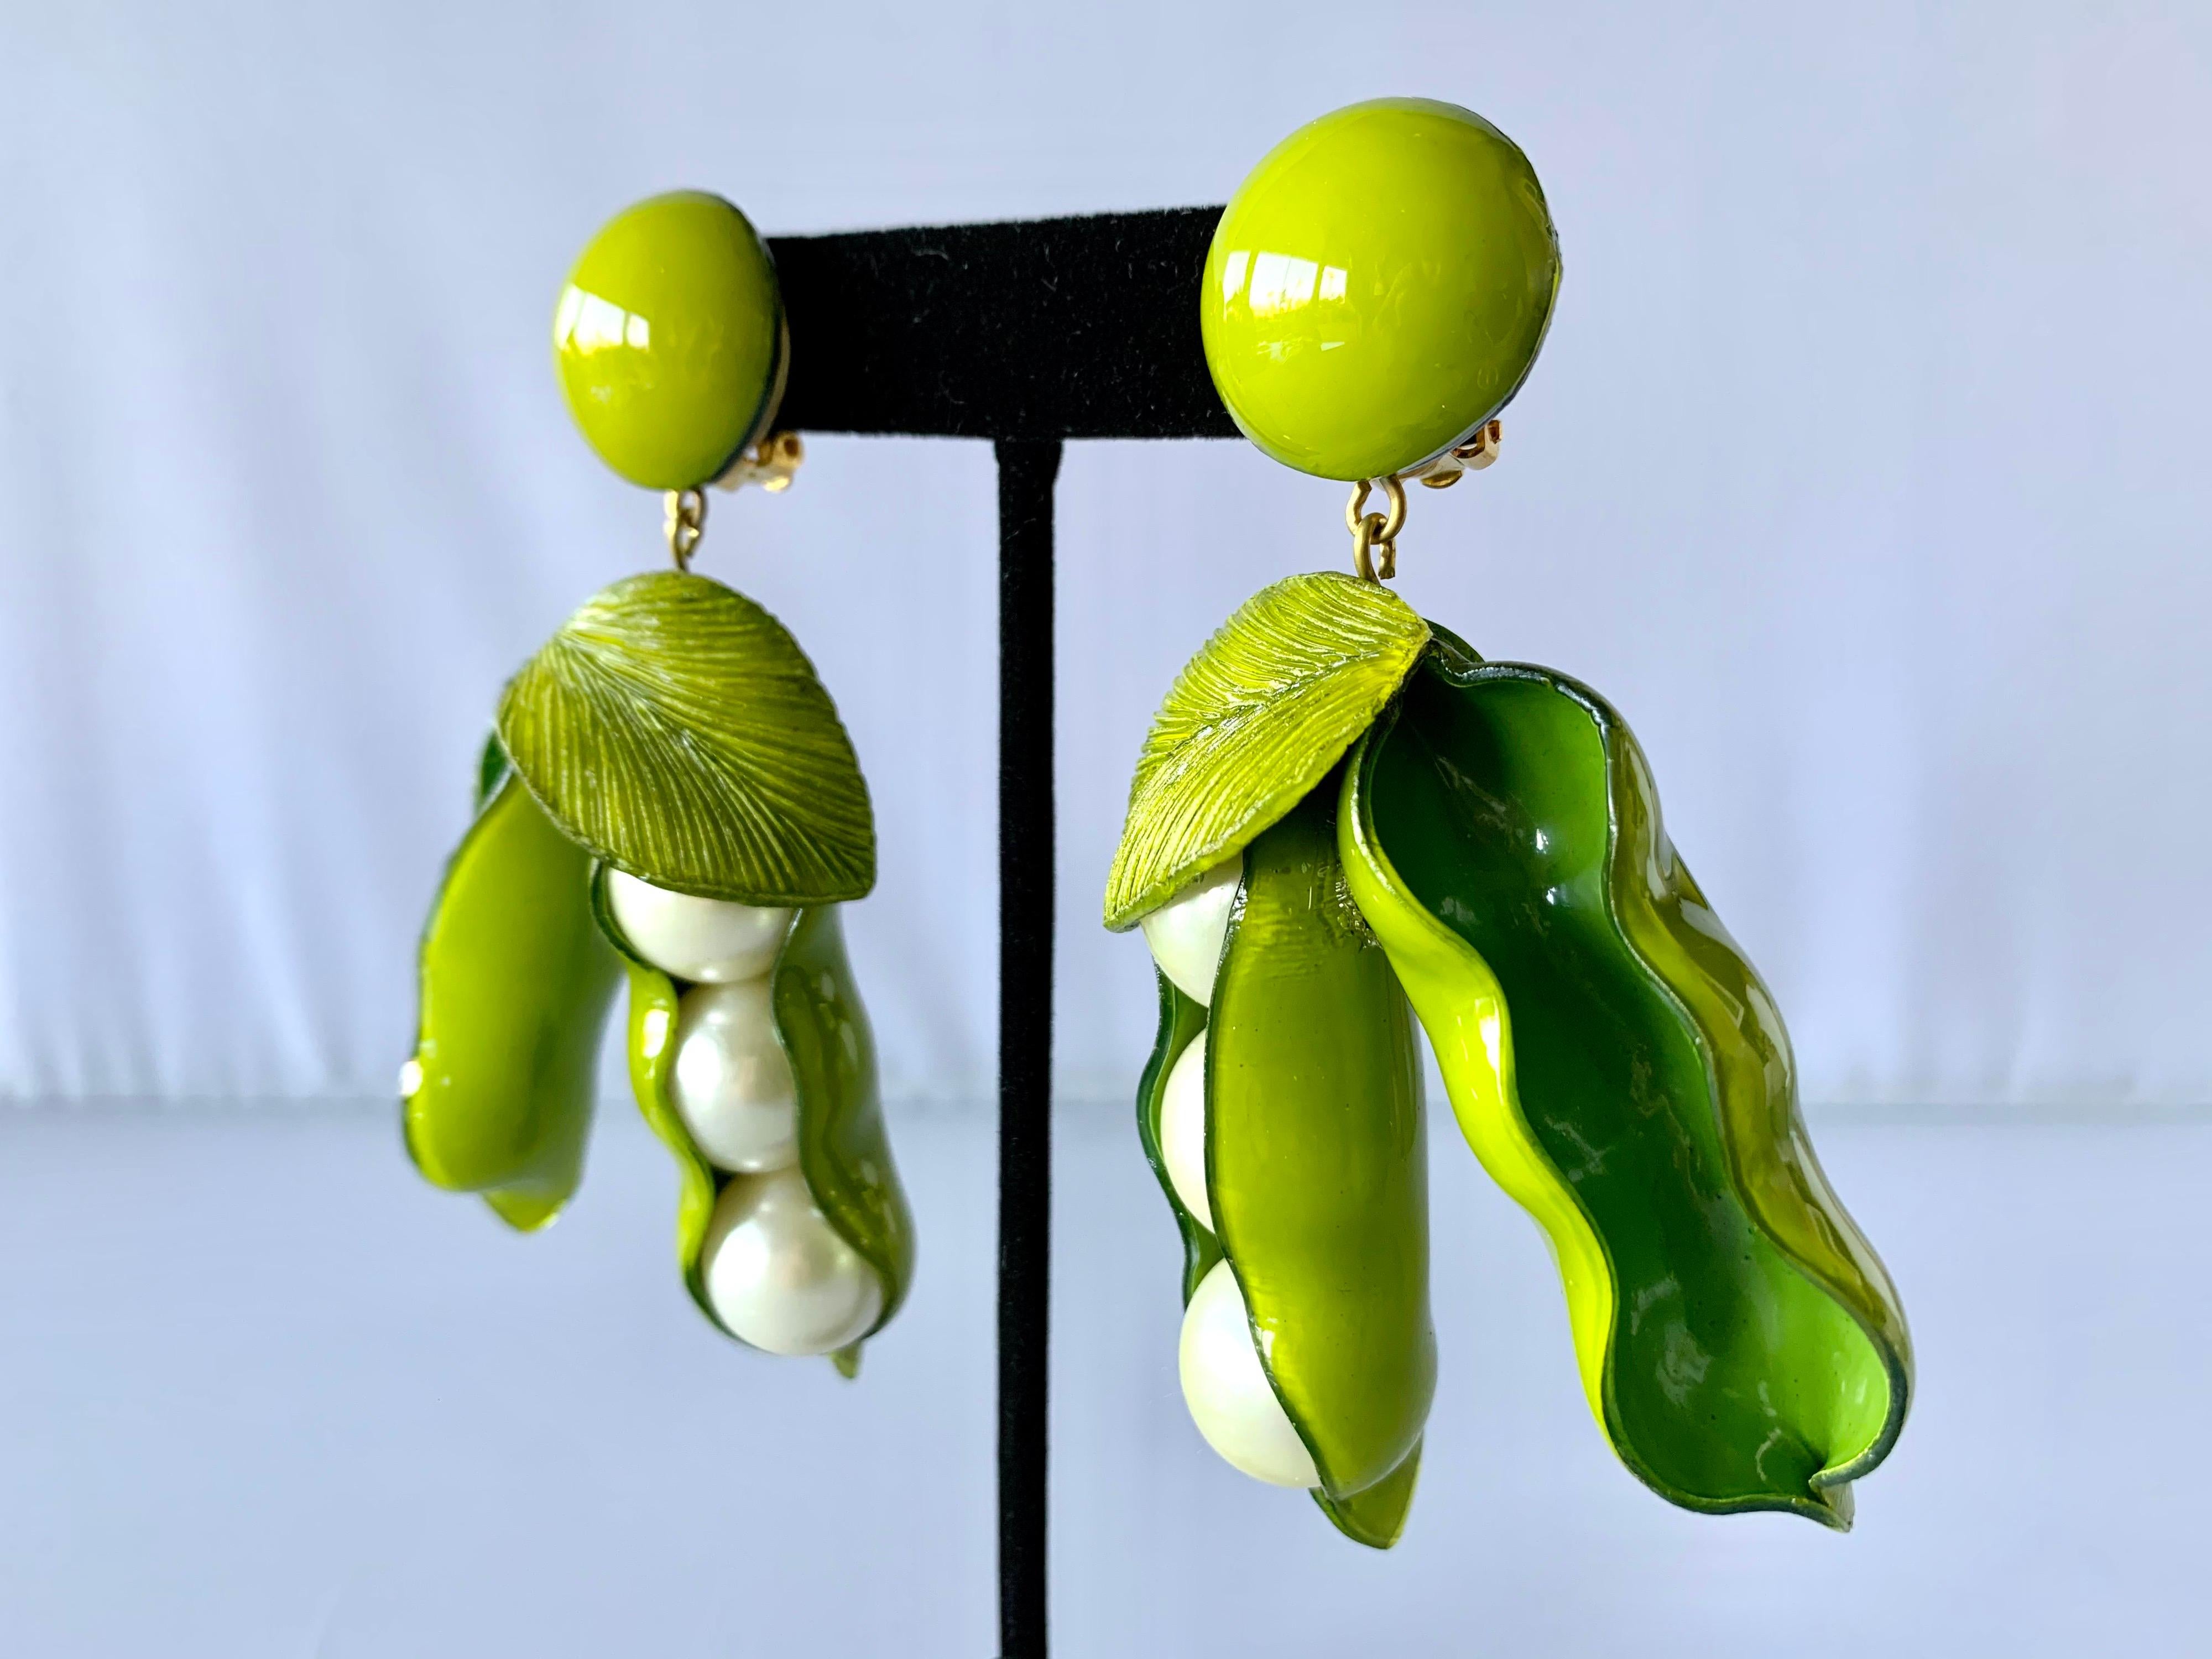 Contemporary handcrafted artisanal clip-on Statement earrings made in Paris France by Cilea Paris - lightweight, featuring two large peapods. The peapods are comprised out of green resin and enamel and have large faux pearls at the center.